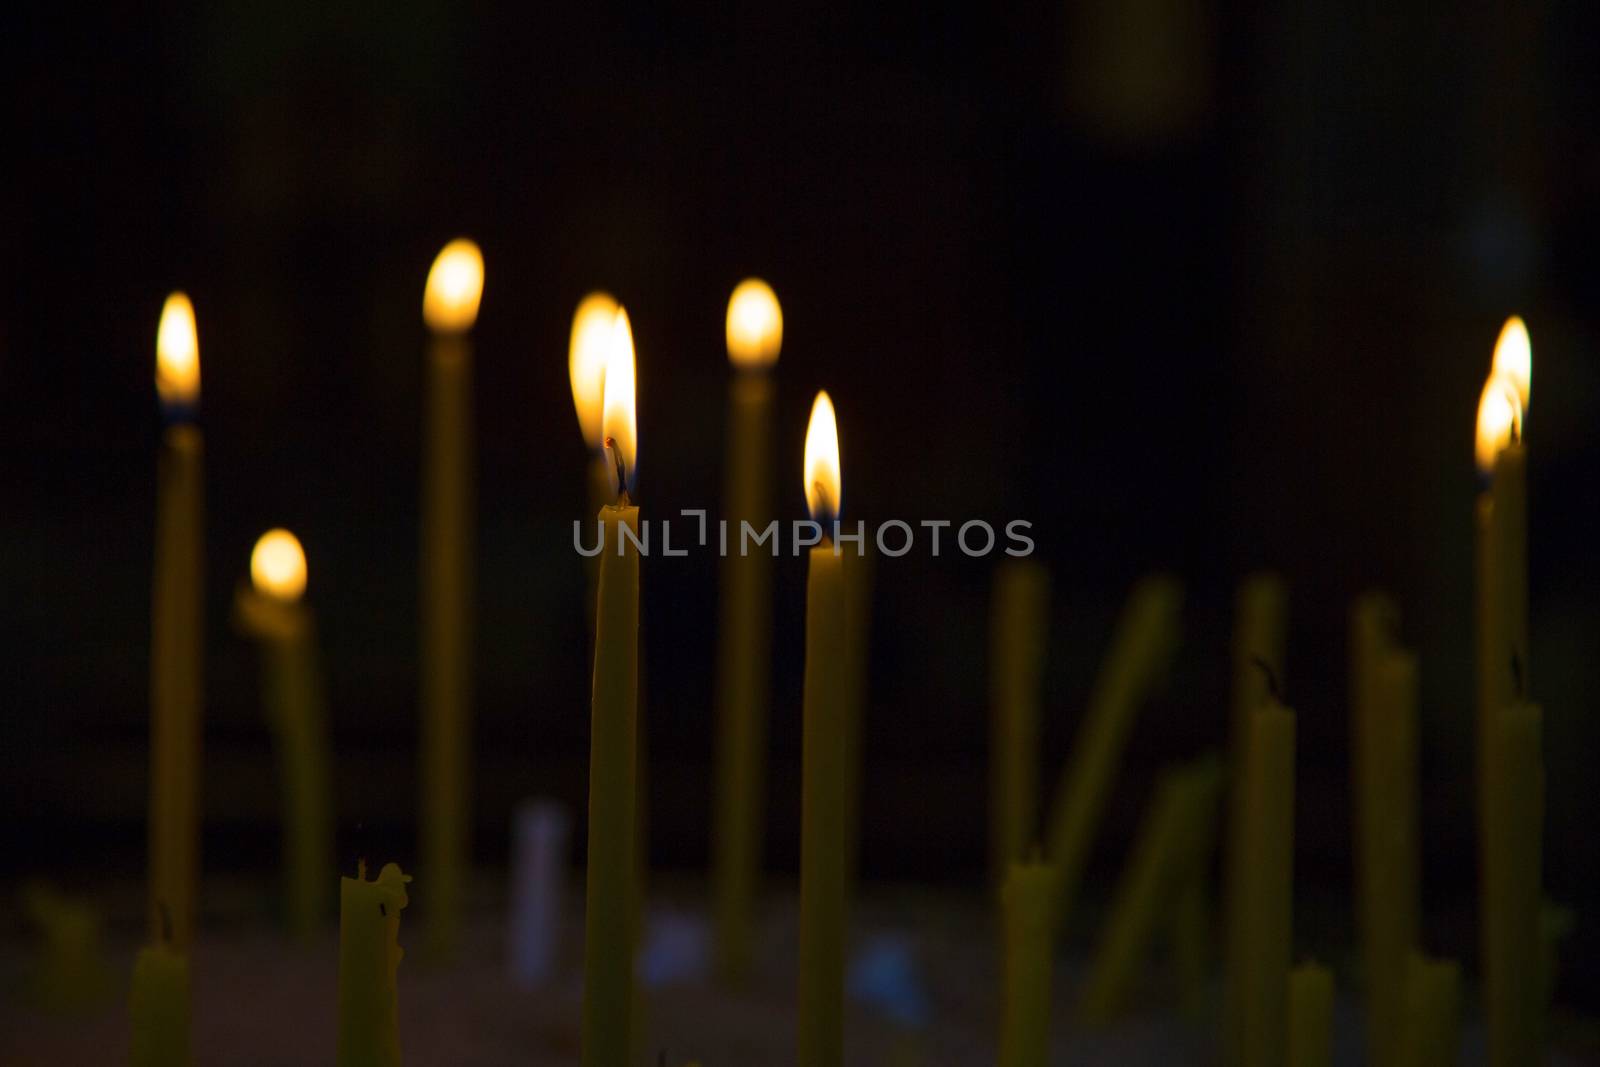 Lighted wax candles in a church burning in the twilight